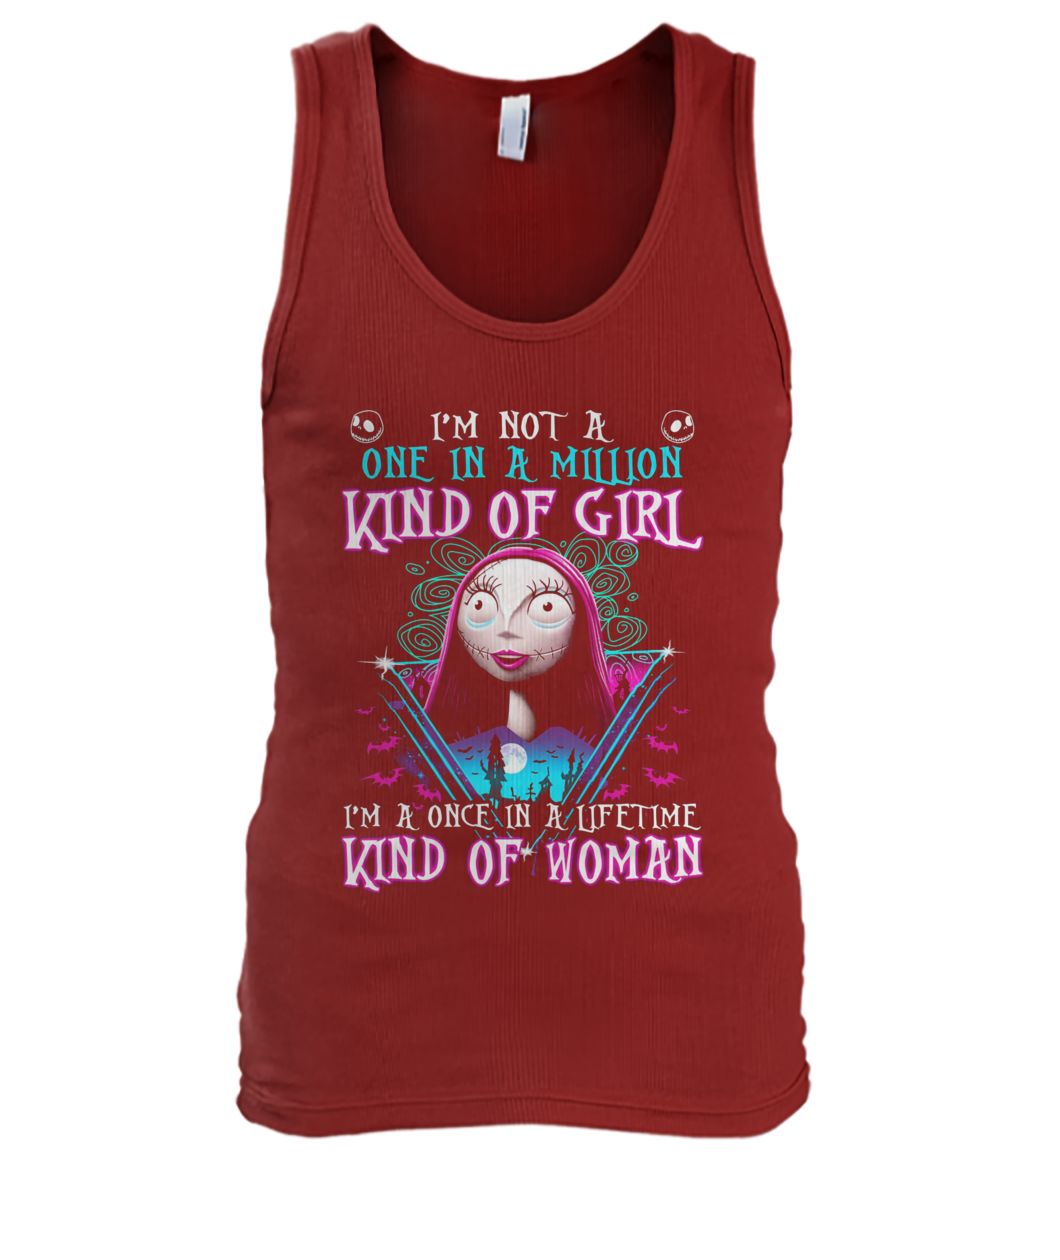 Sally I'm not a one in a million kind of girl men's tank top